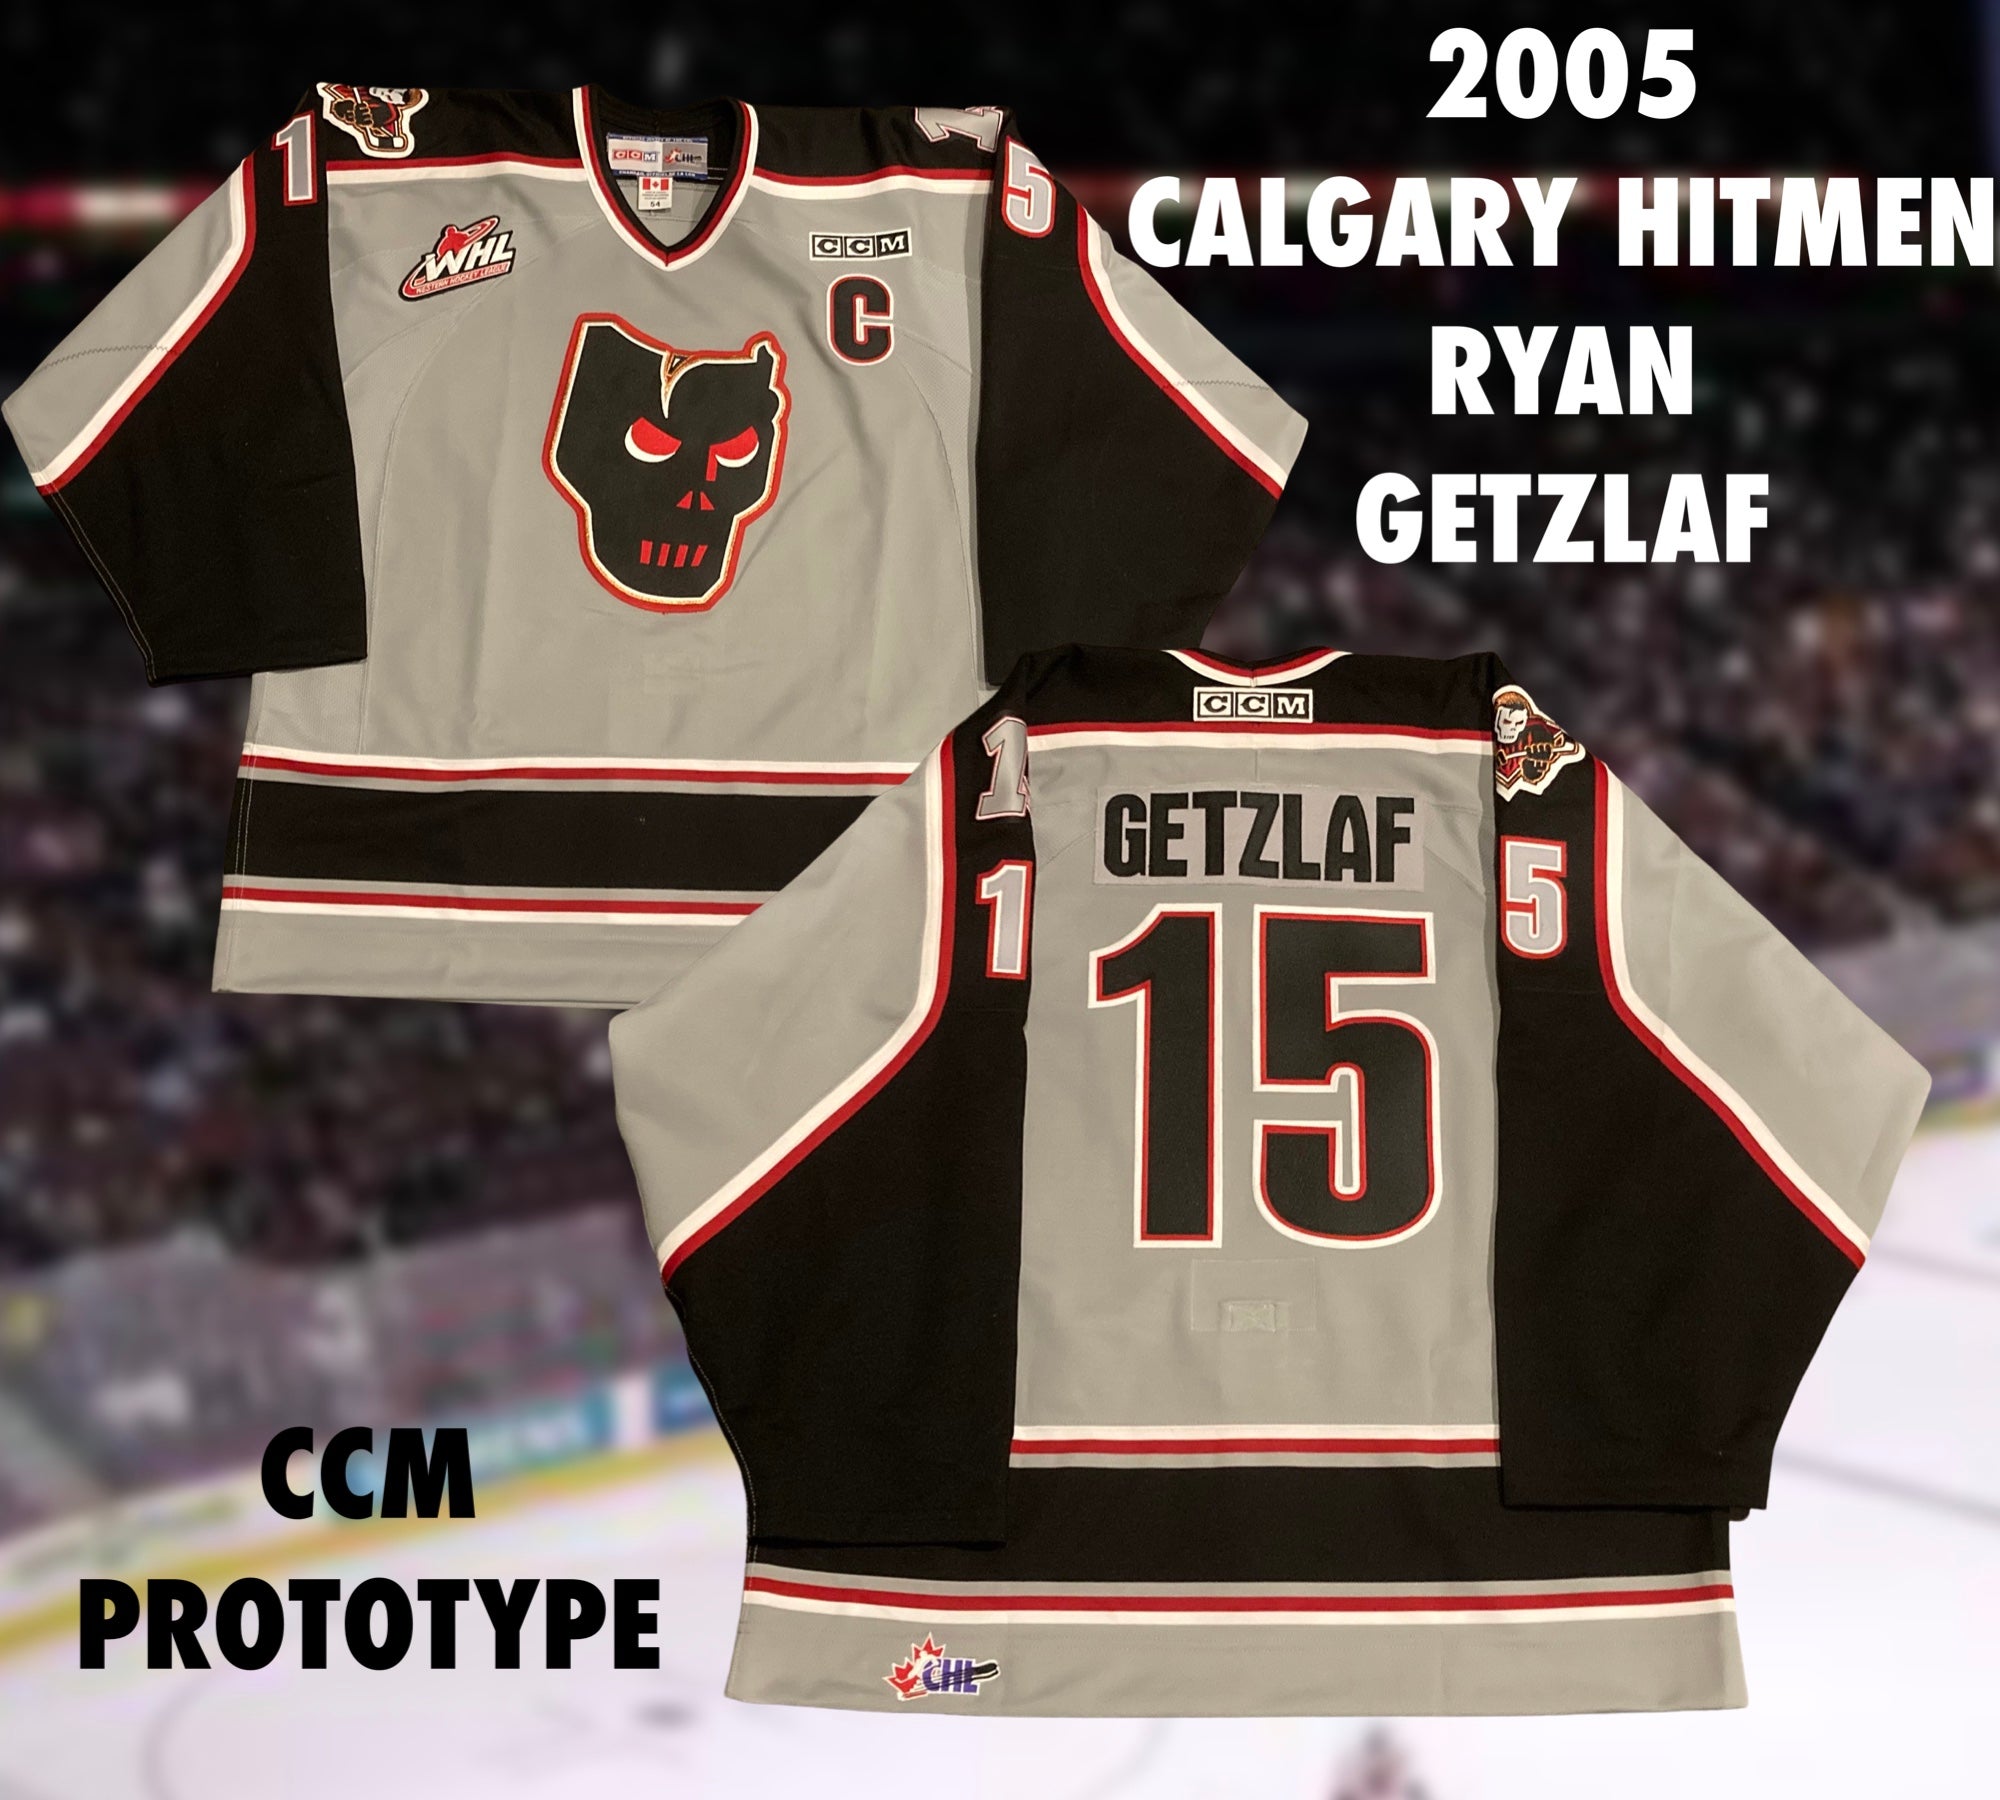 Calgary Hitmen on X: Congratulations to Ali for winning the  #CHLLeaveYourMark design a jersey contest! Ali's jersey design will be worn  during a Hitmen home game next season! @RealCdnSS